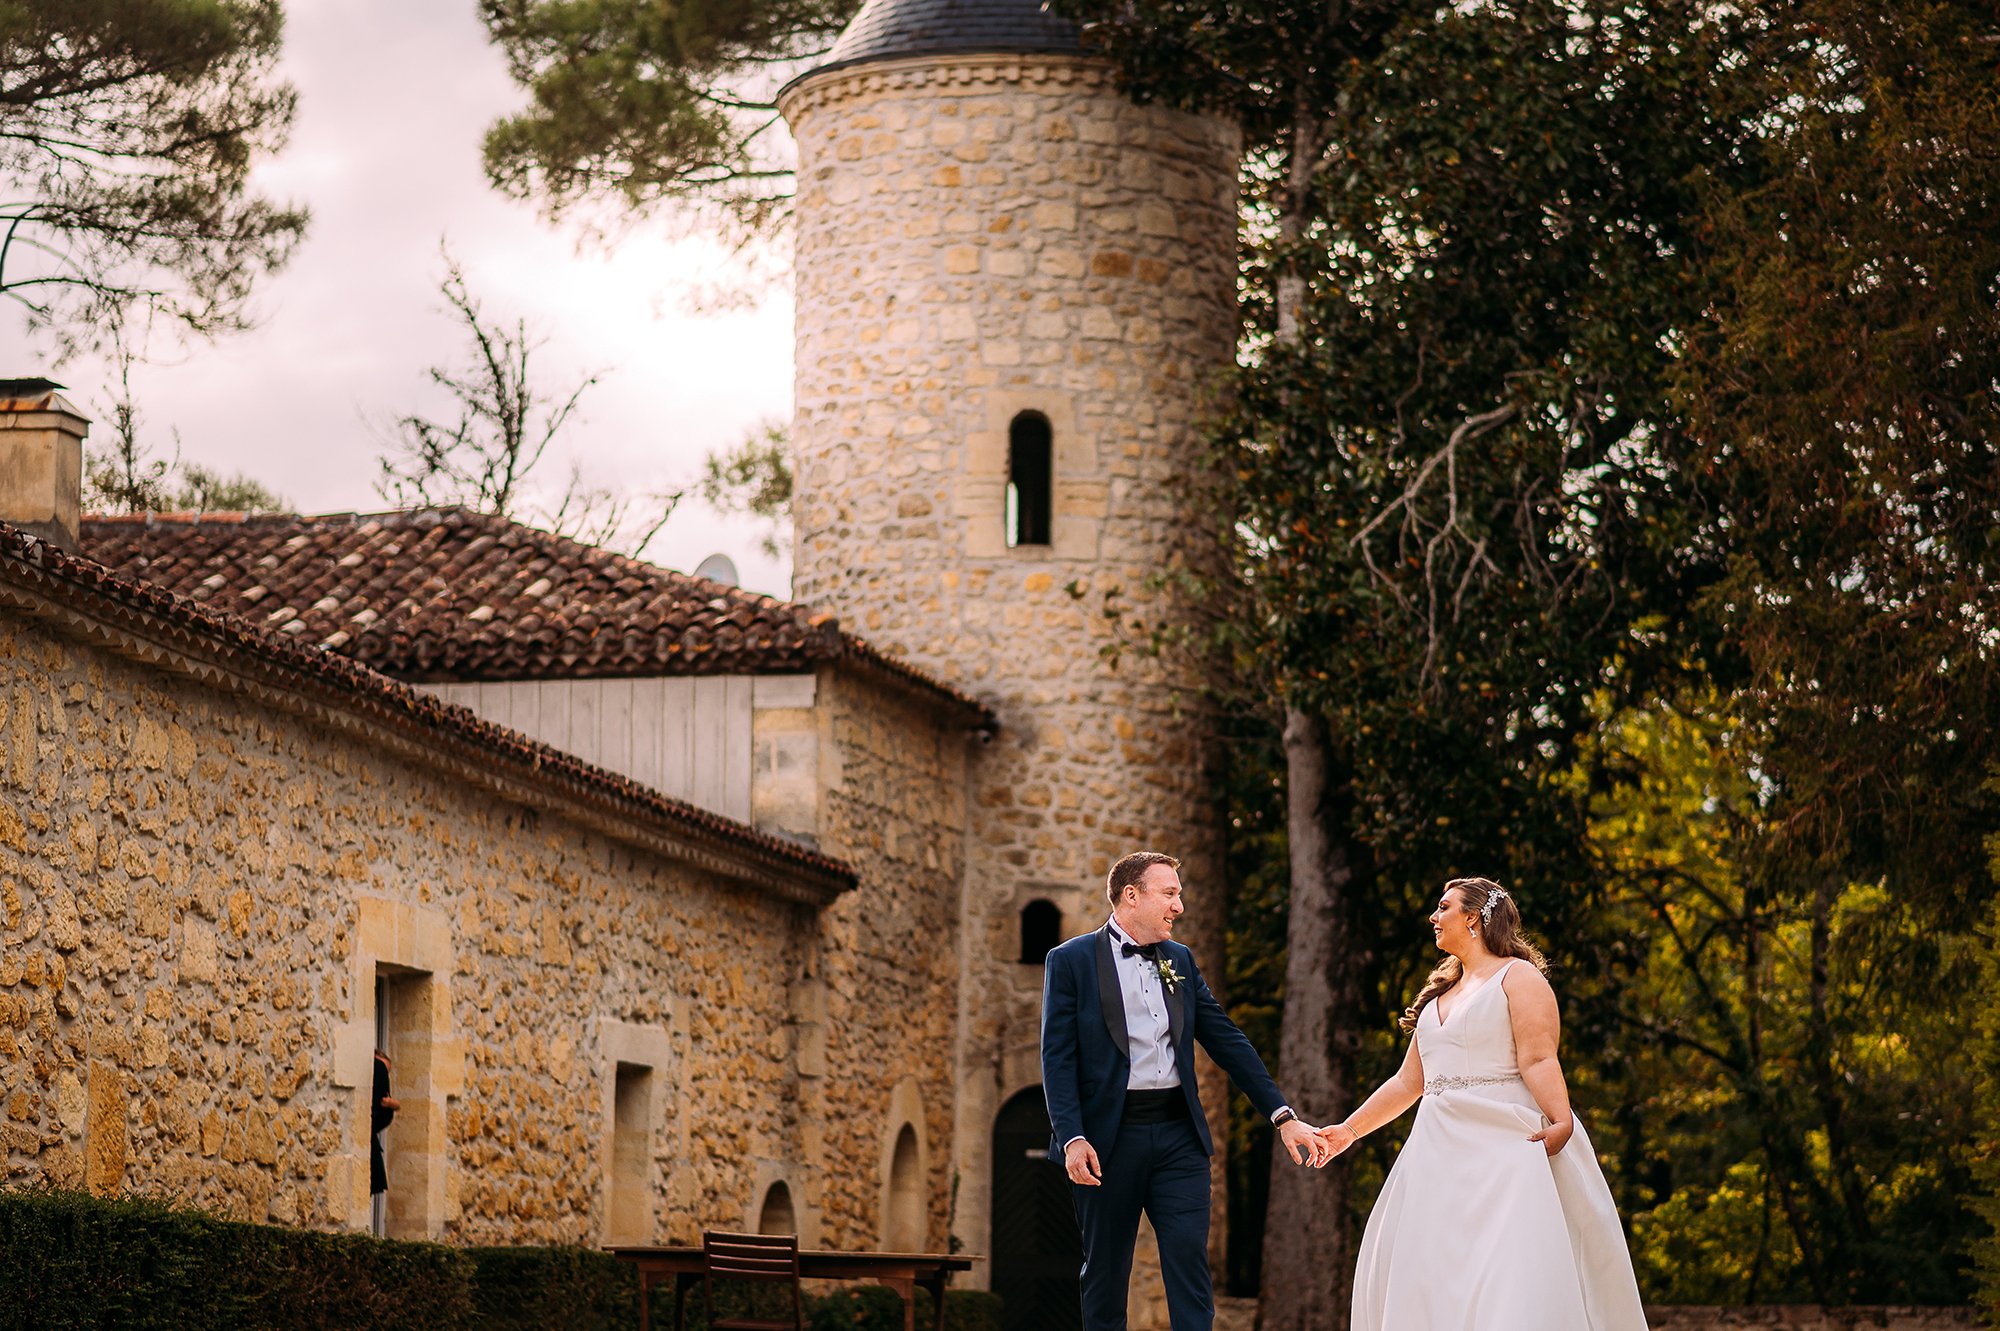  Couple walking in front of chateau wedding venue. 